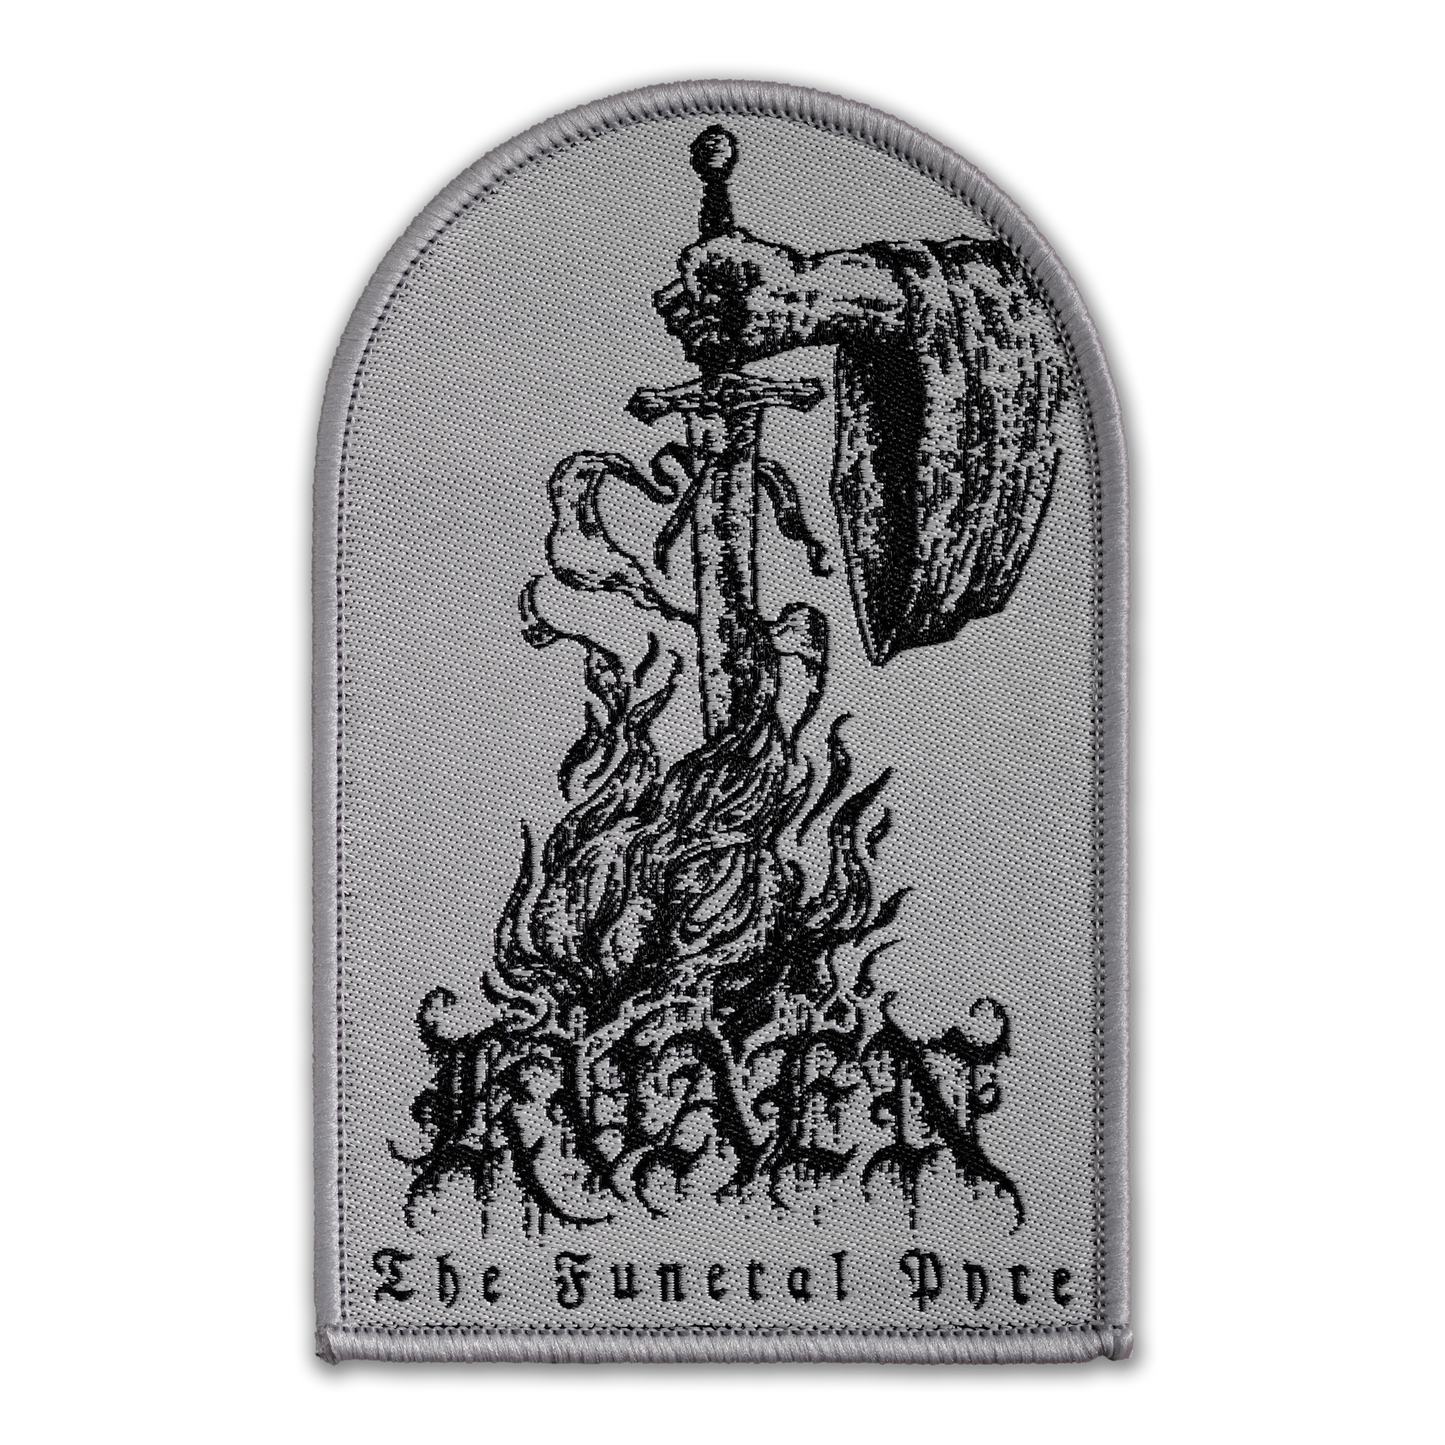 Kvaen - The Funeral Pyre